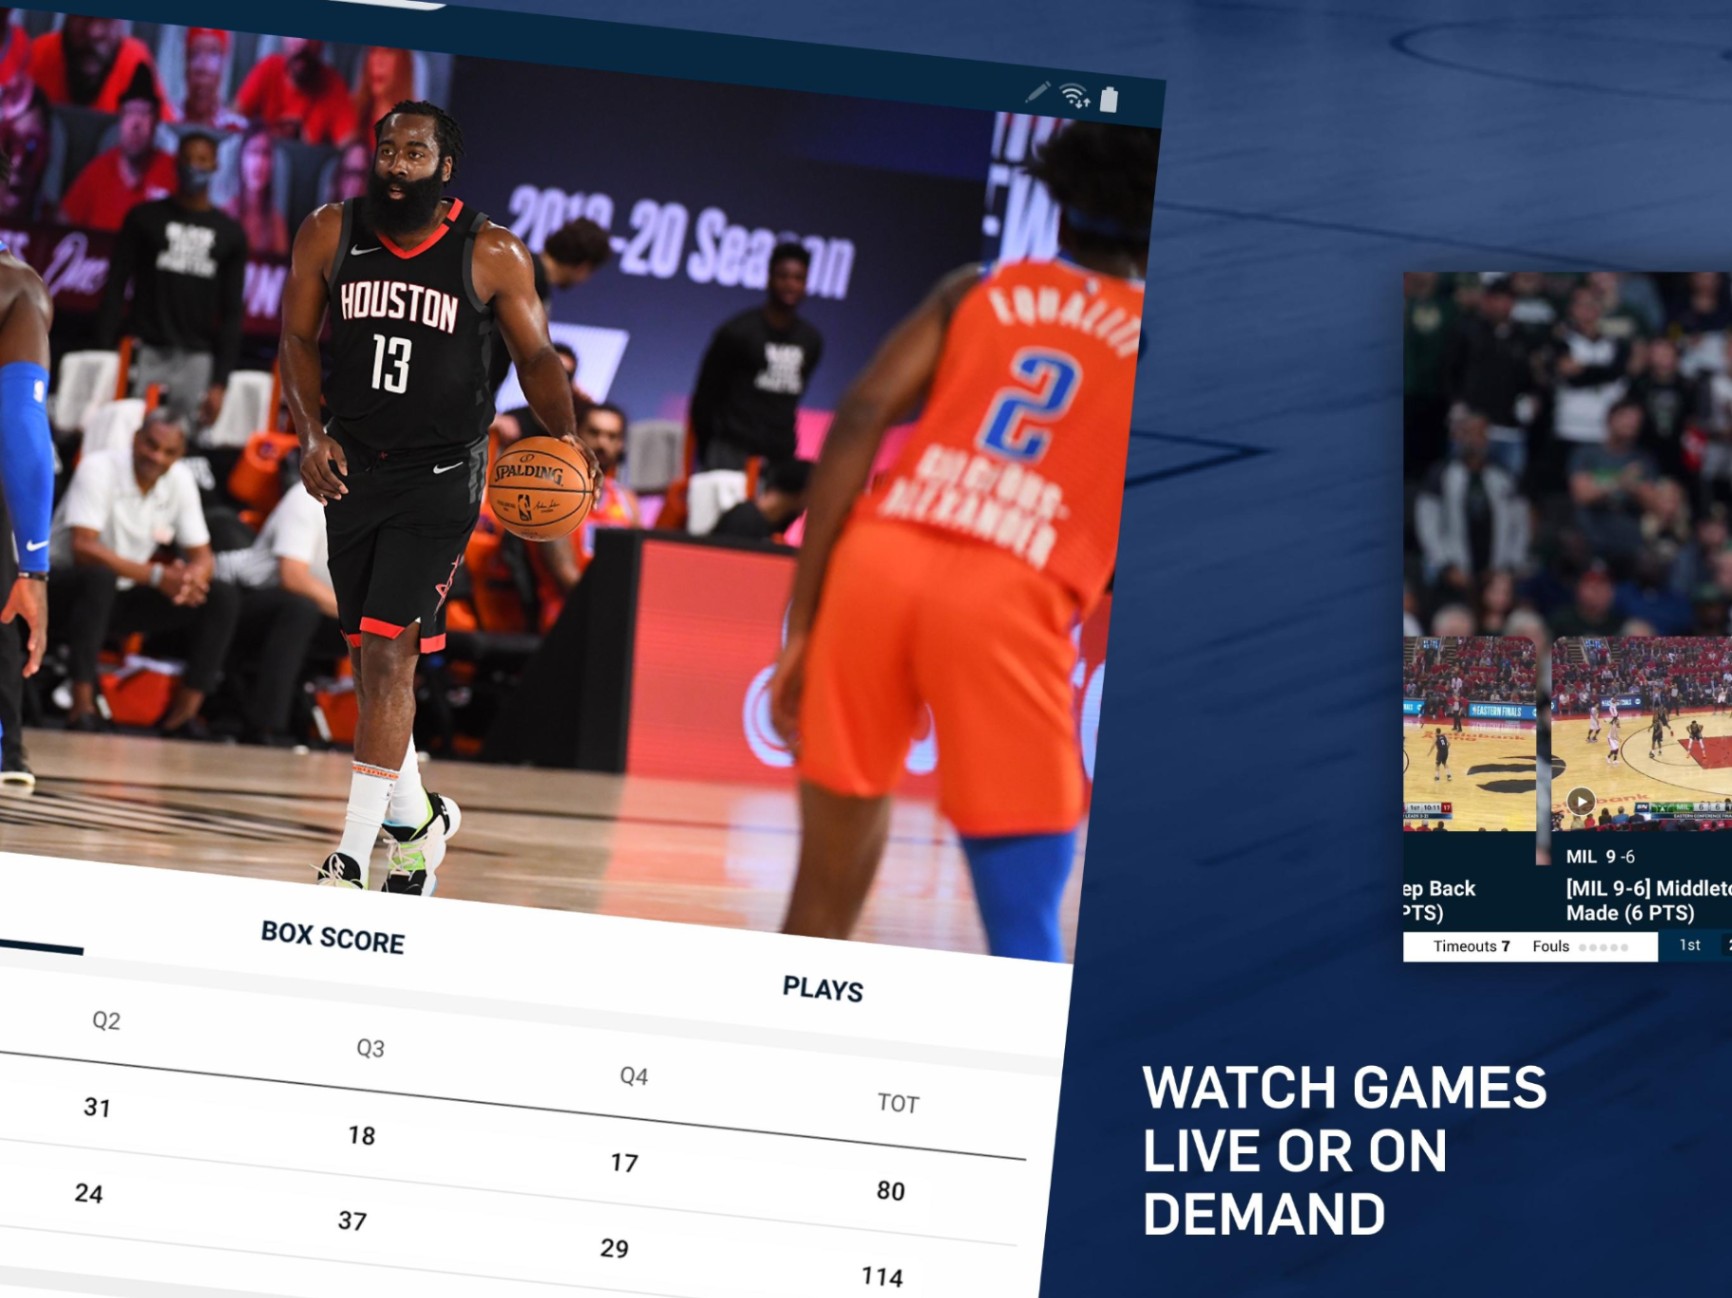 Download the NBA App and Stay on Top of Games, Scores and More